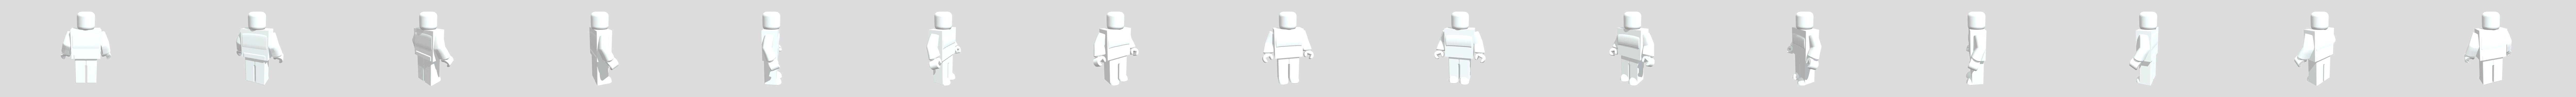 Roblox Character Download Free 3d Model By Drkianrorsyoutube Drkianrorsyoutube 5b64b64 - printable roblox 3d characters template blank